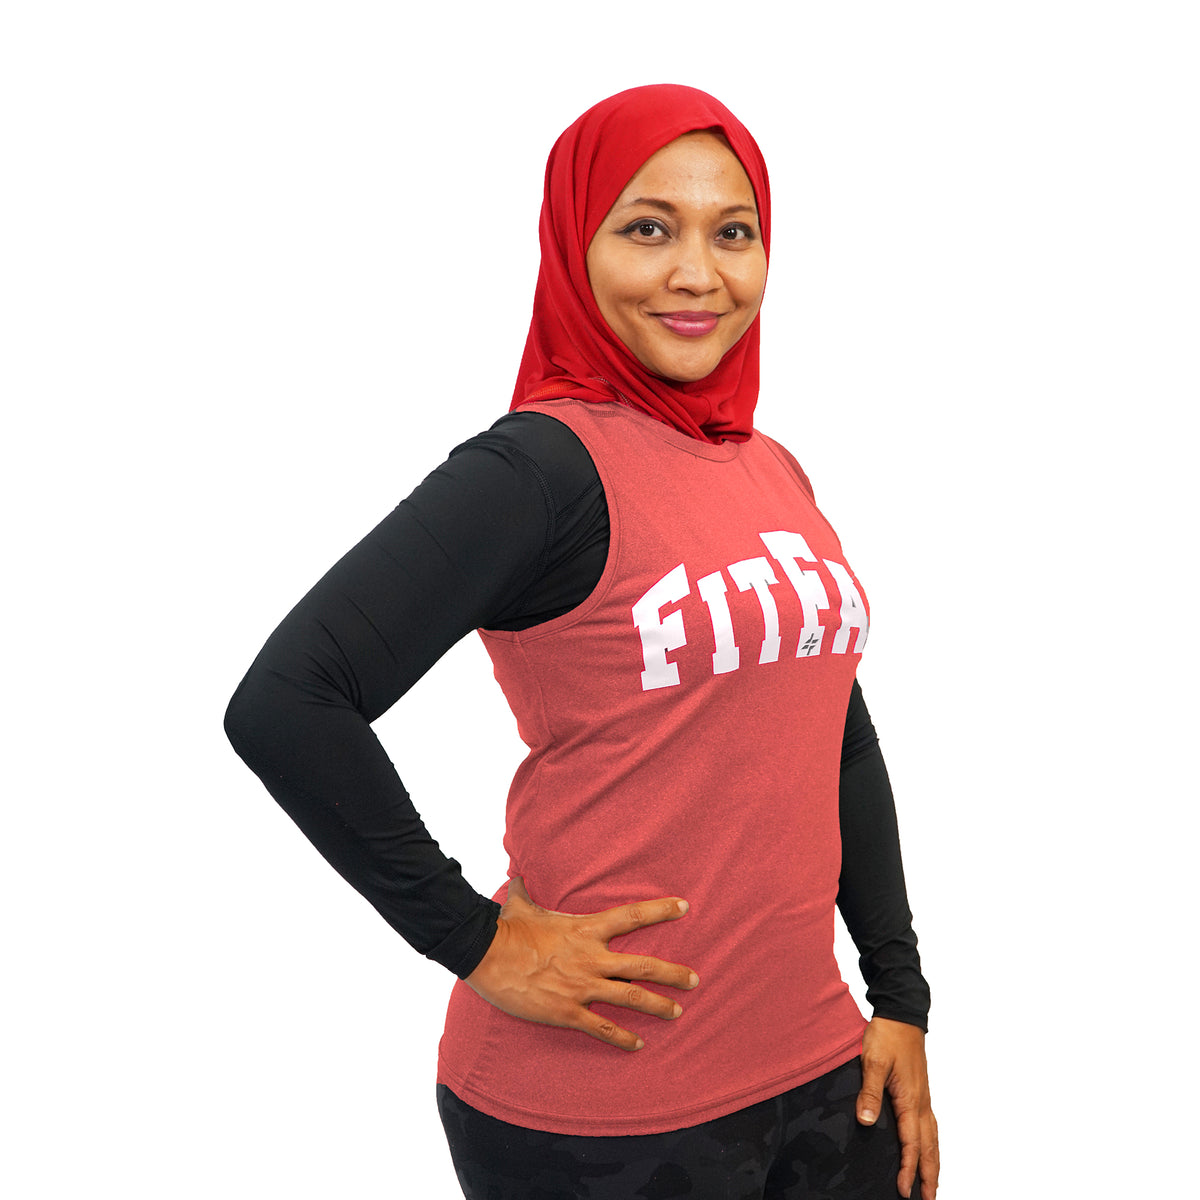 Powerlifting Top - Ready Red